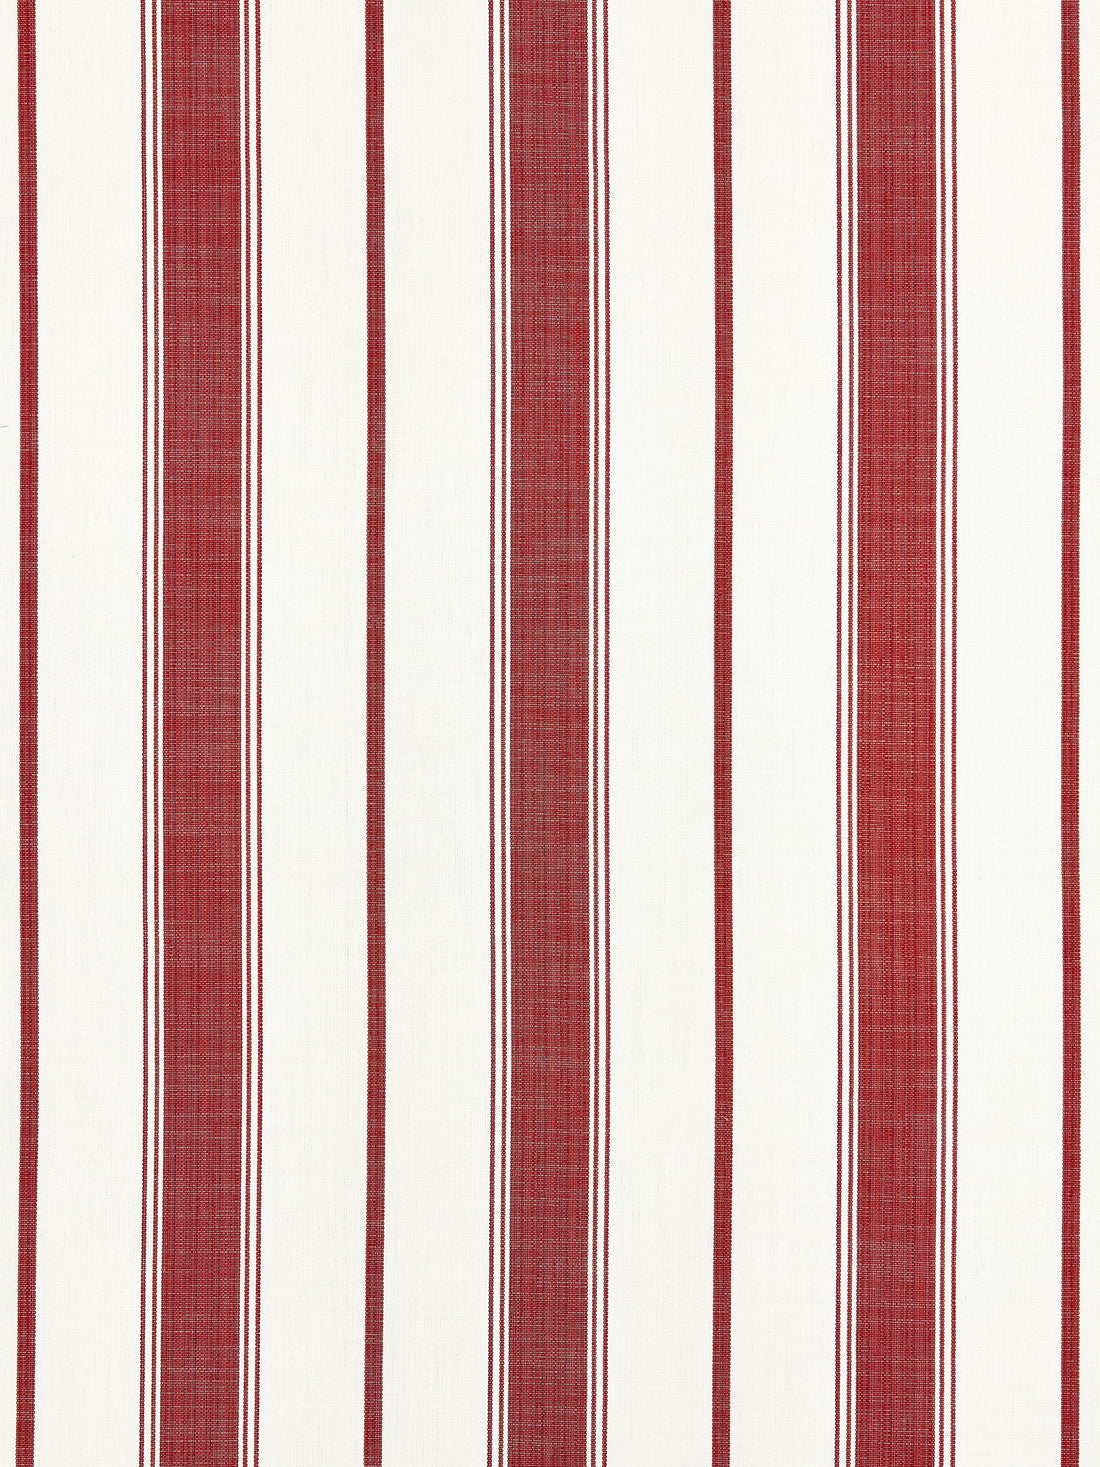 Sconset Stripe fabric in currant color - pattern number SC 000227110 - by Scalamandre in the Scalamandre Fabrics Book 1 collection